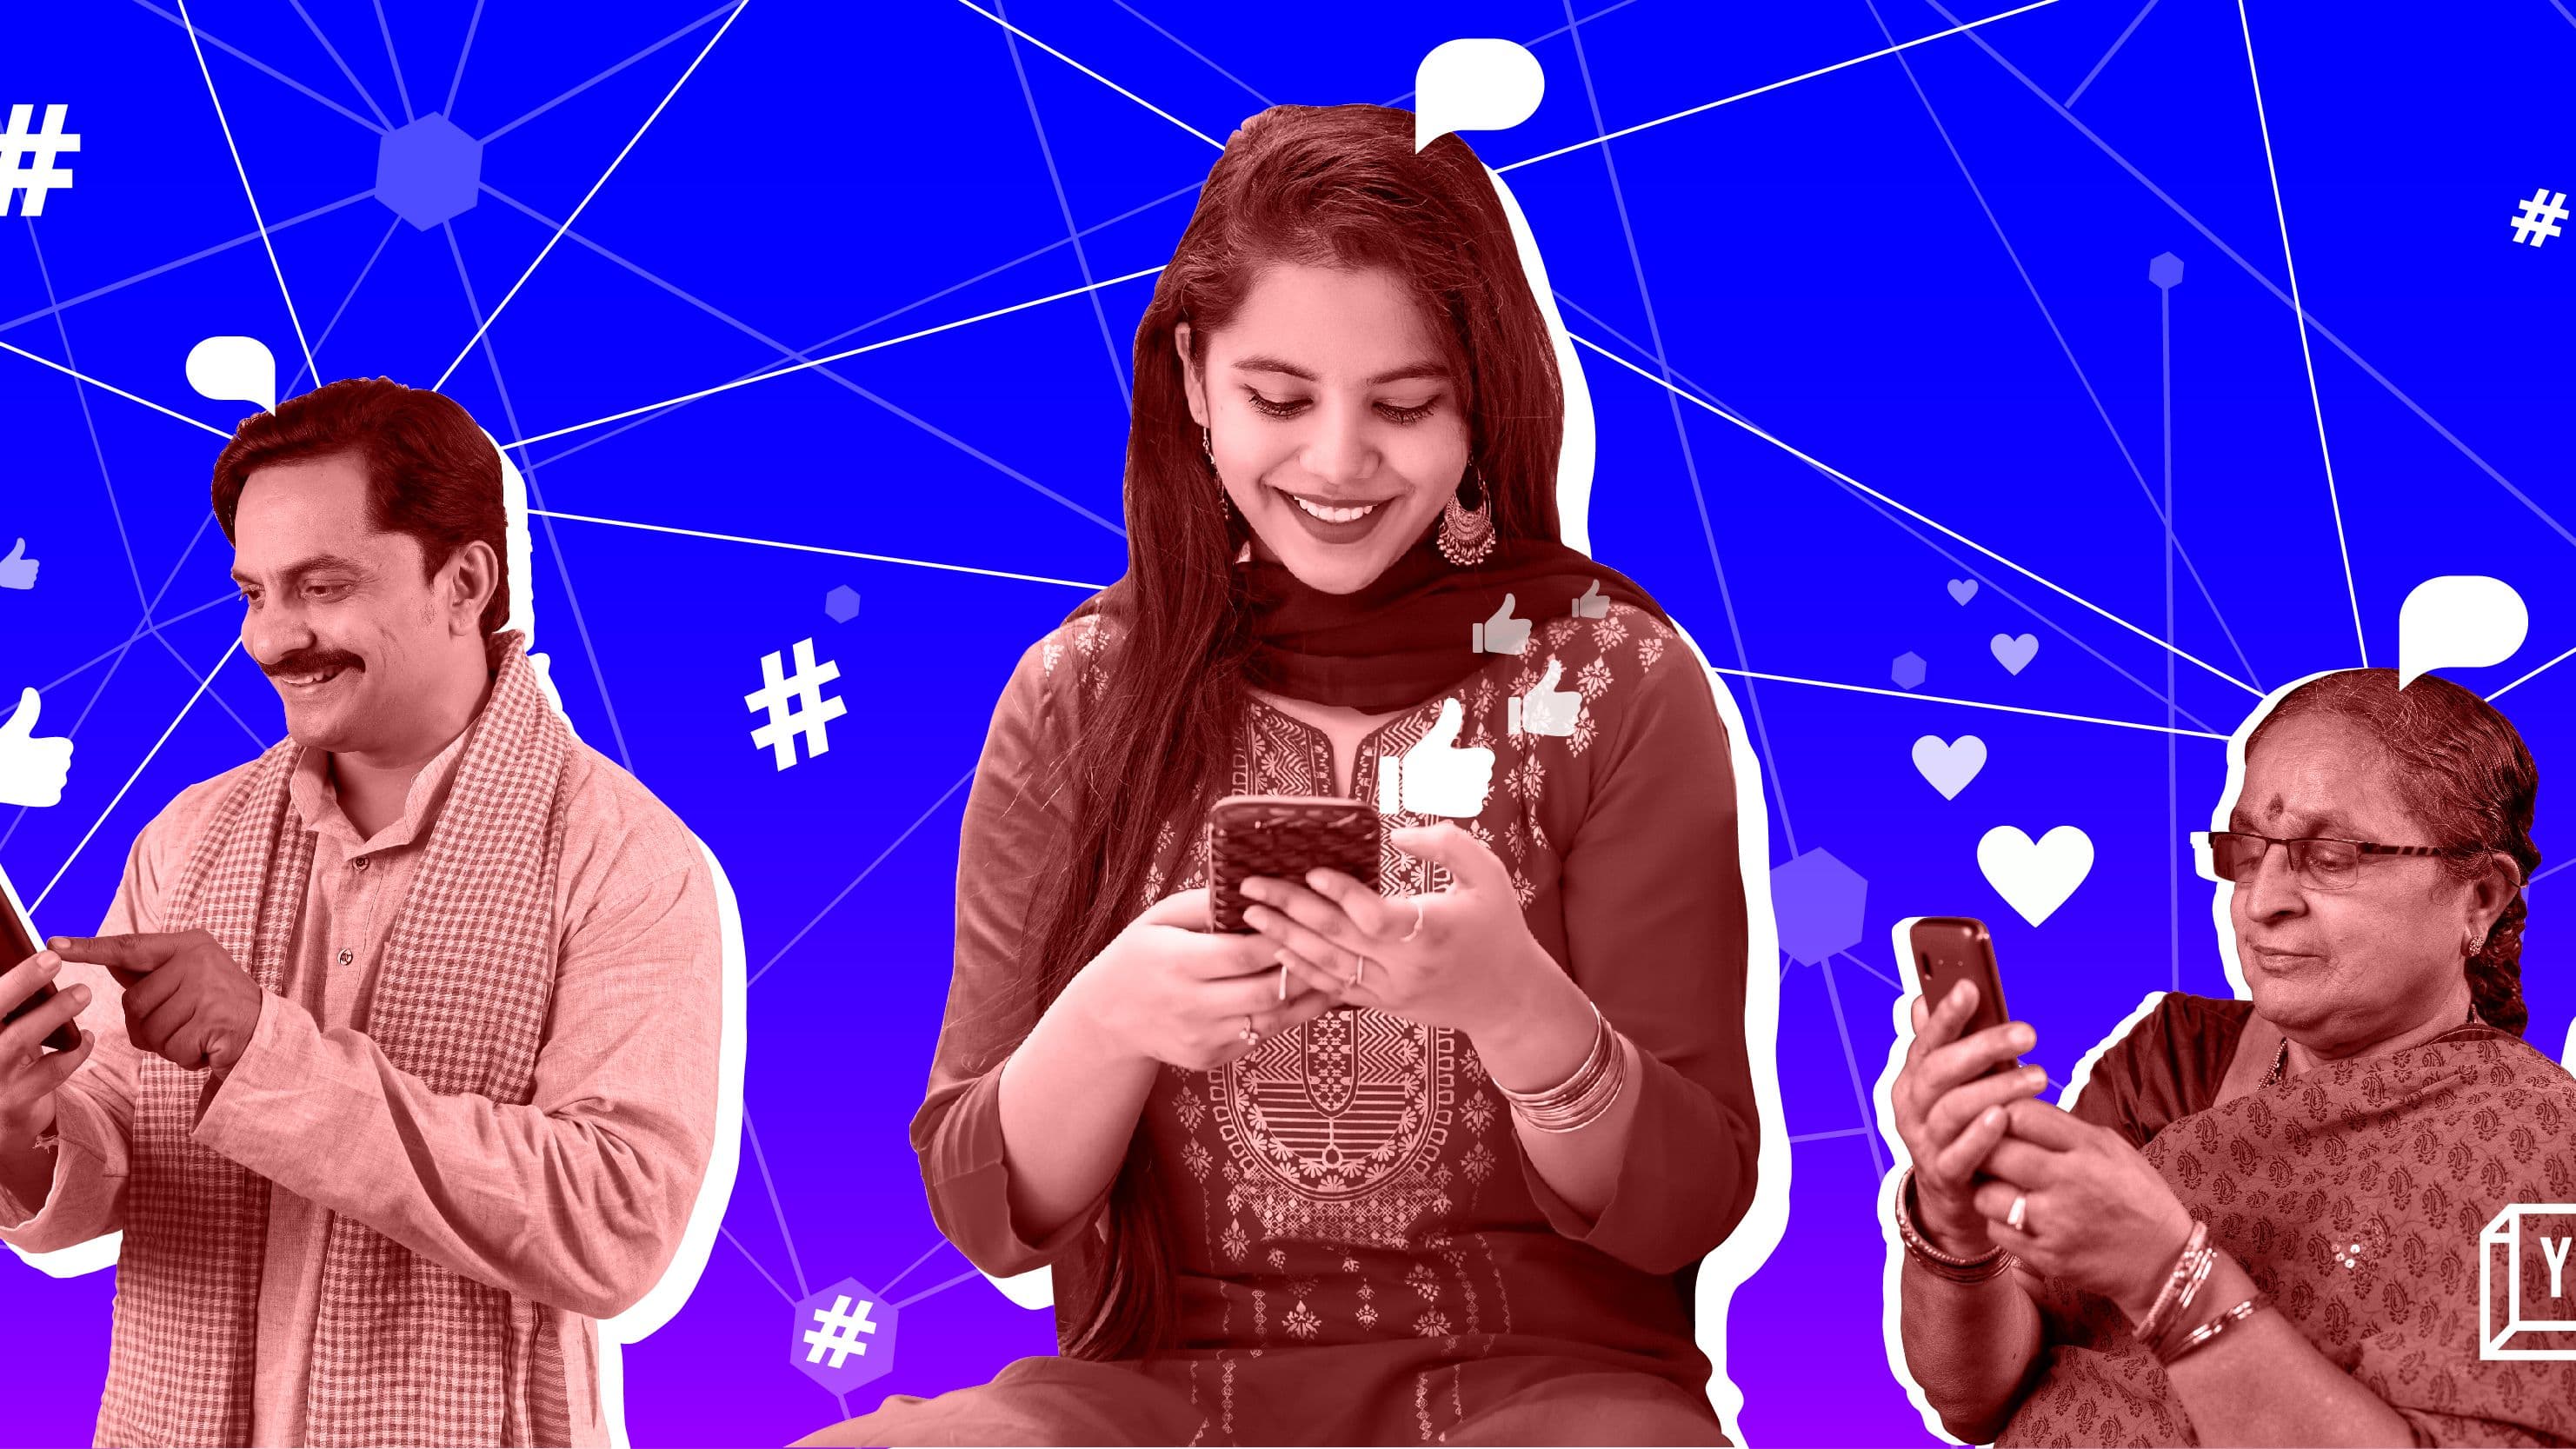 Two-thirds of consumers in India find user-generated content to be as entertaining as traditional media: Accenture report